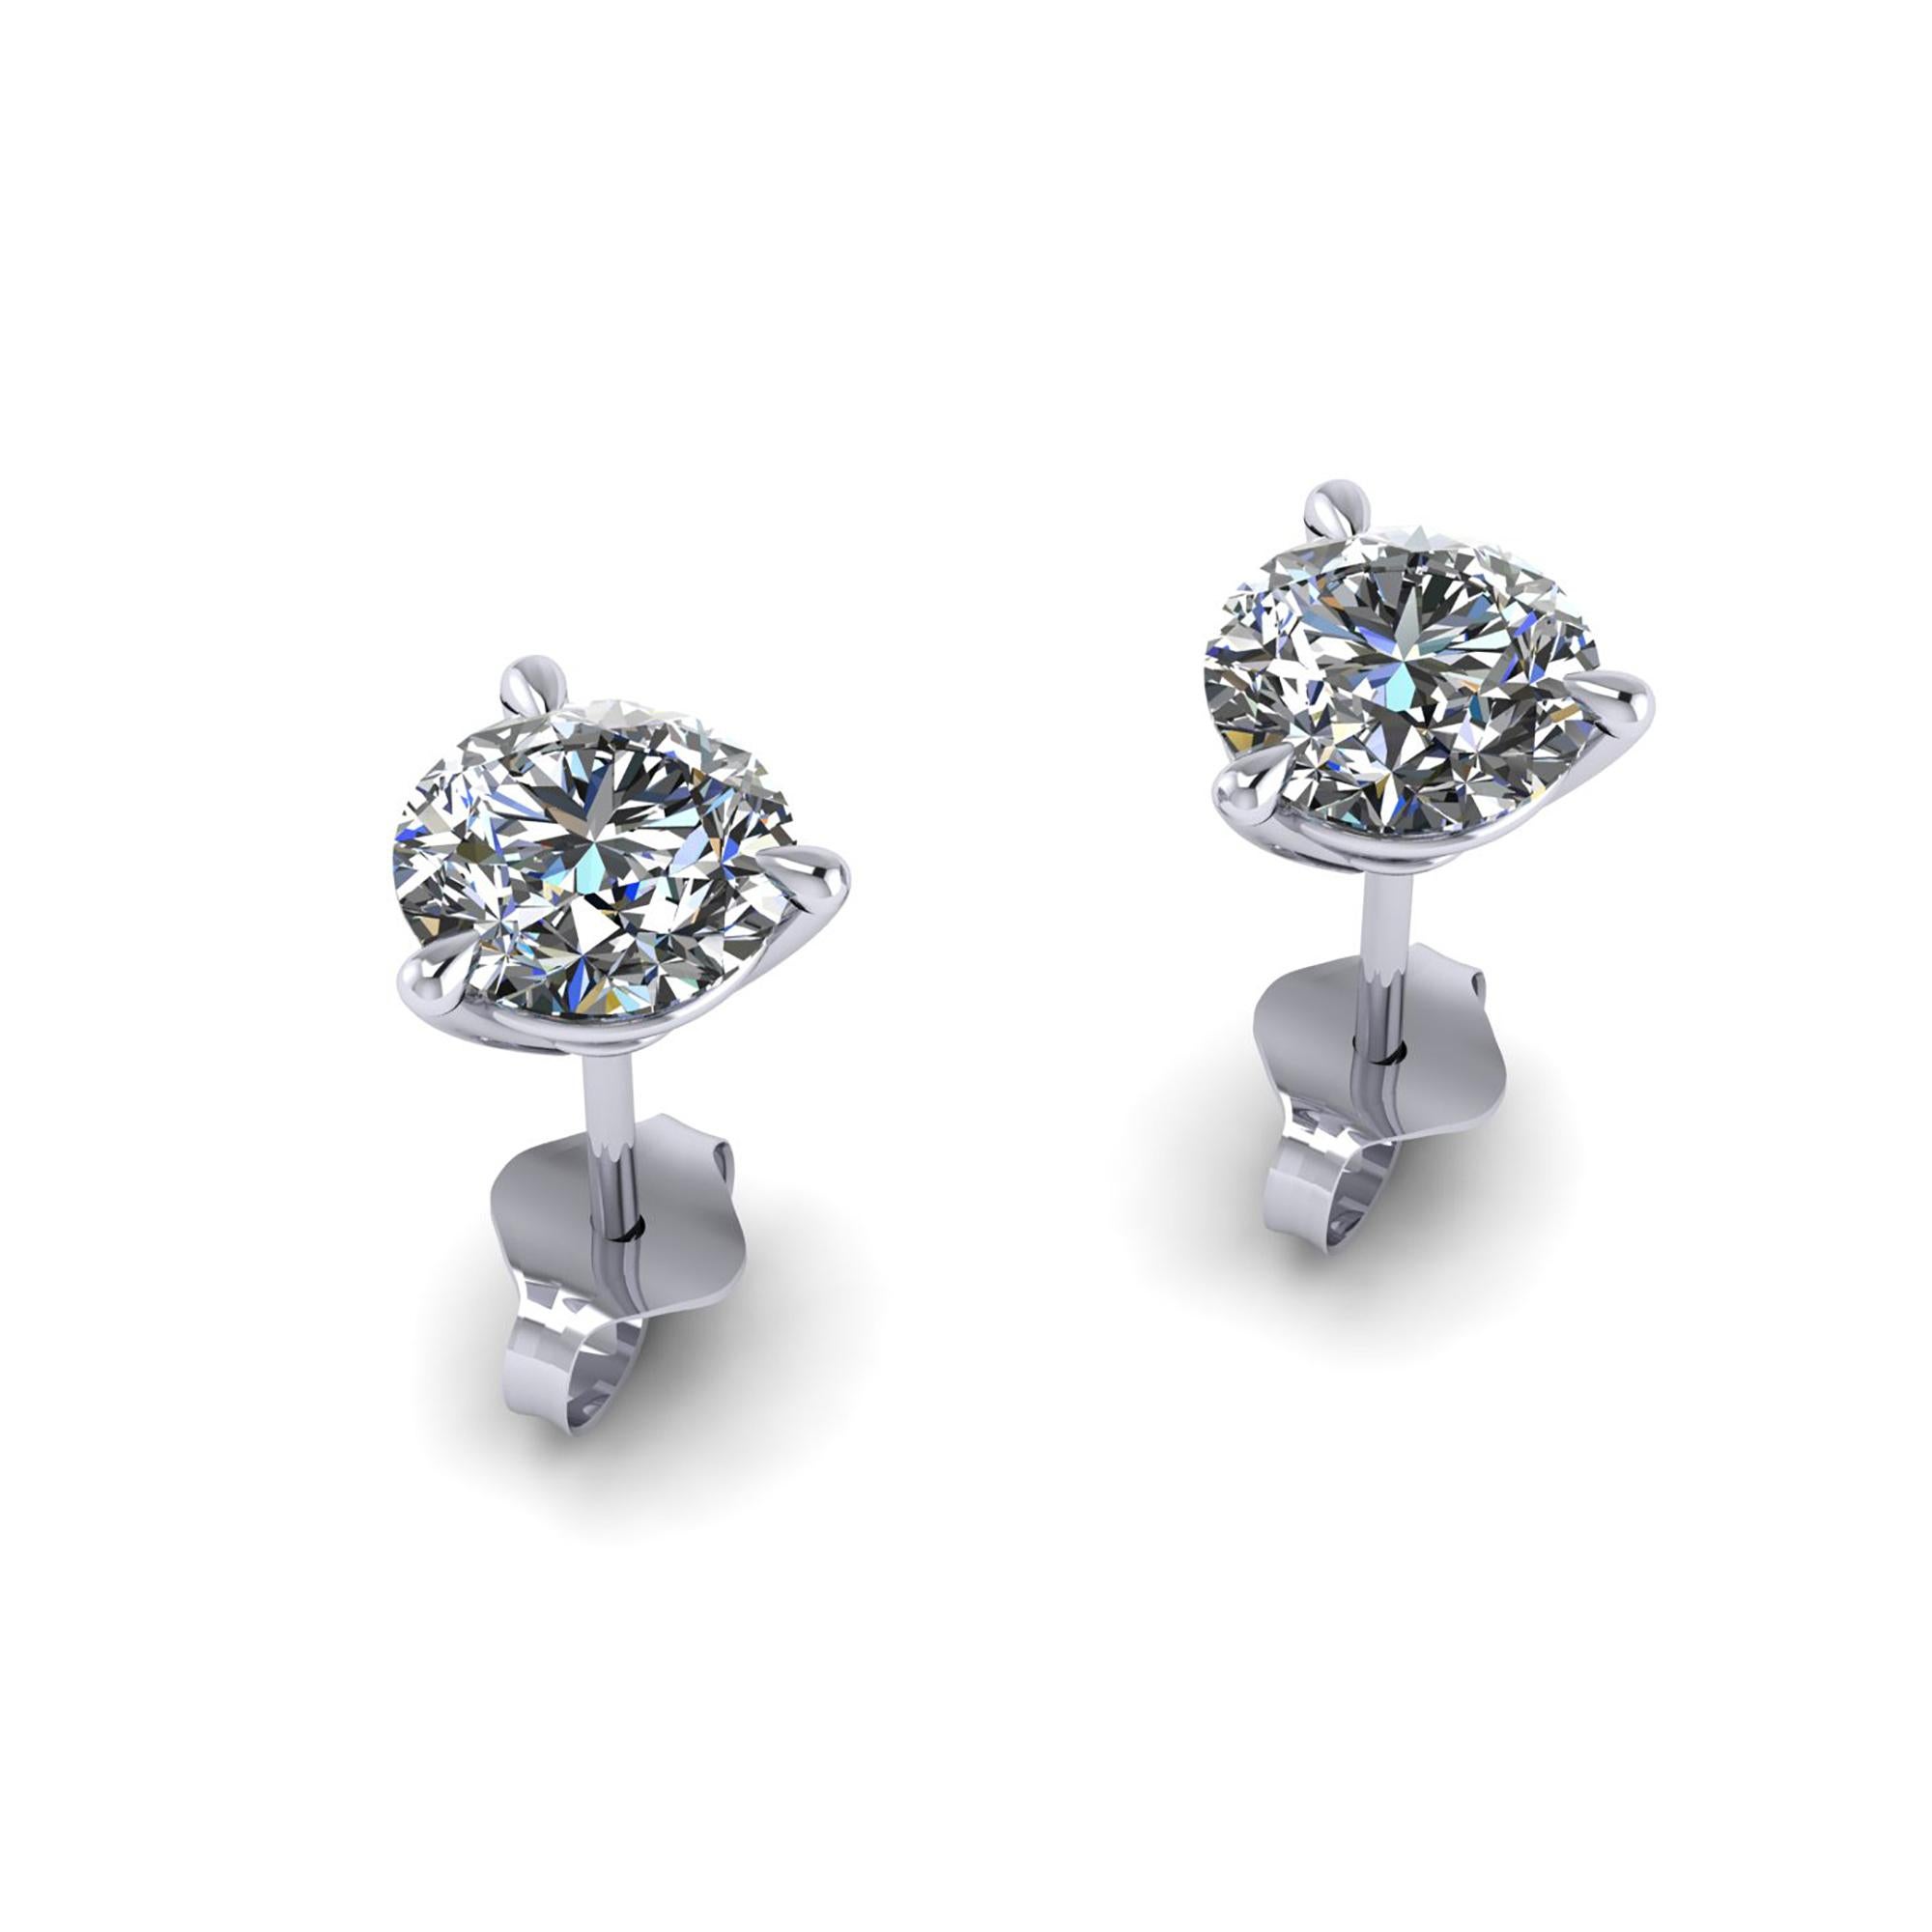 GIA Certified 2.01 Carat total, Round Diamonds D color, VVS1 clarity, Triple Excellent Specs,  Martini Studs made in Platinum in New York by Italian designer, Low setting style, pret-a-porter, easy to wear, ideal for every woman from office to